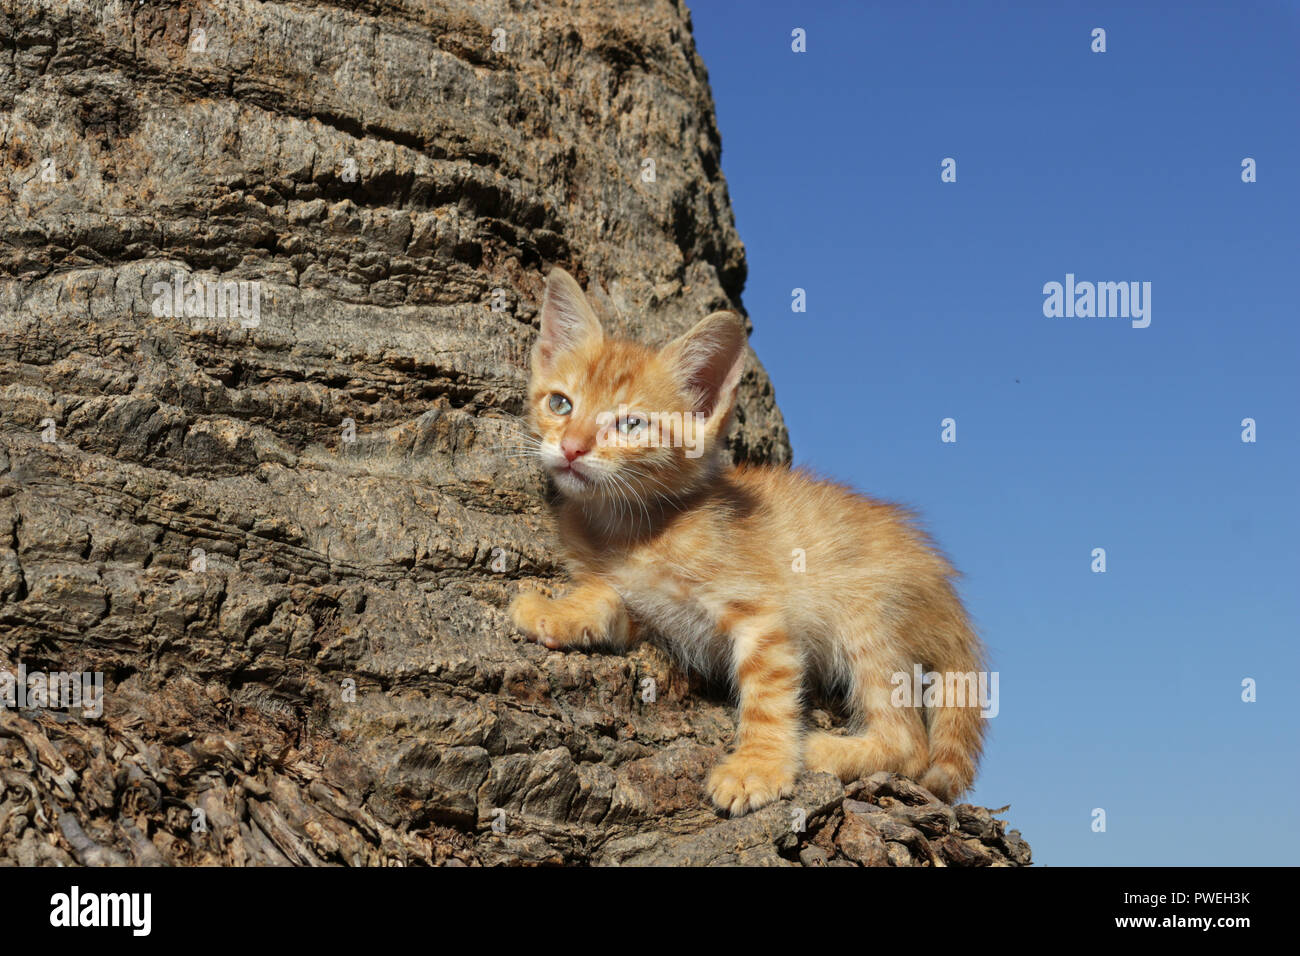 kitten, red tabby, 7 weeks old, climbing a tree Stock Photo